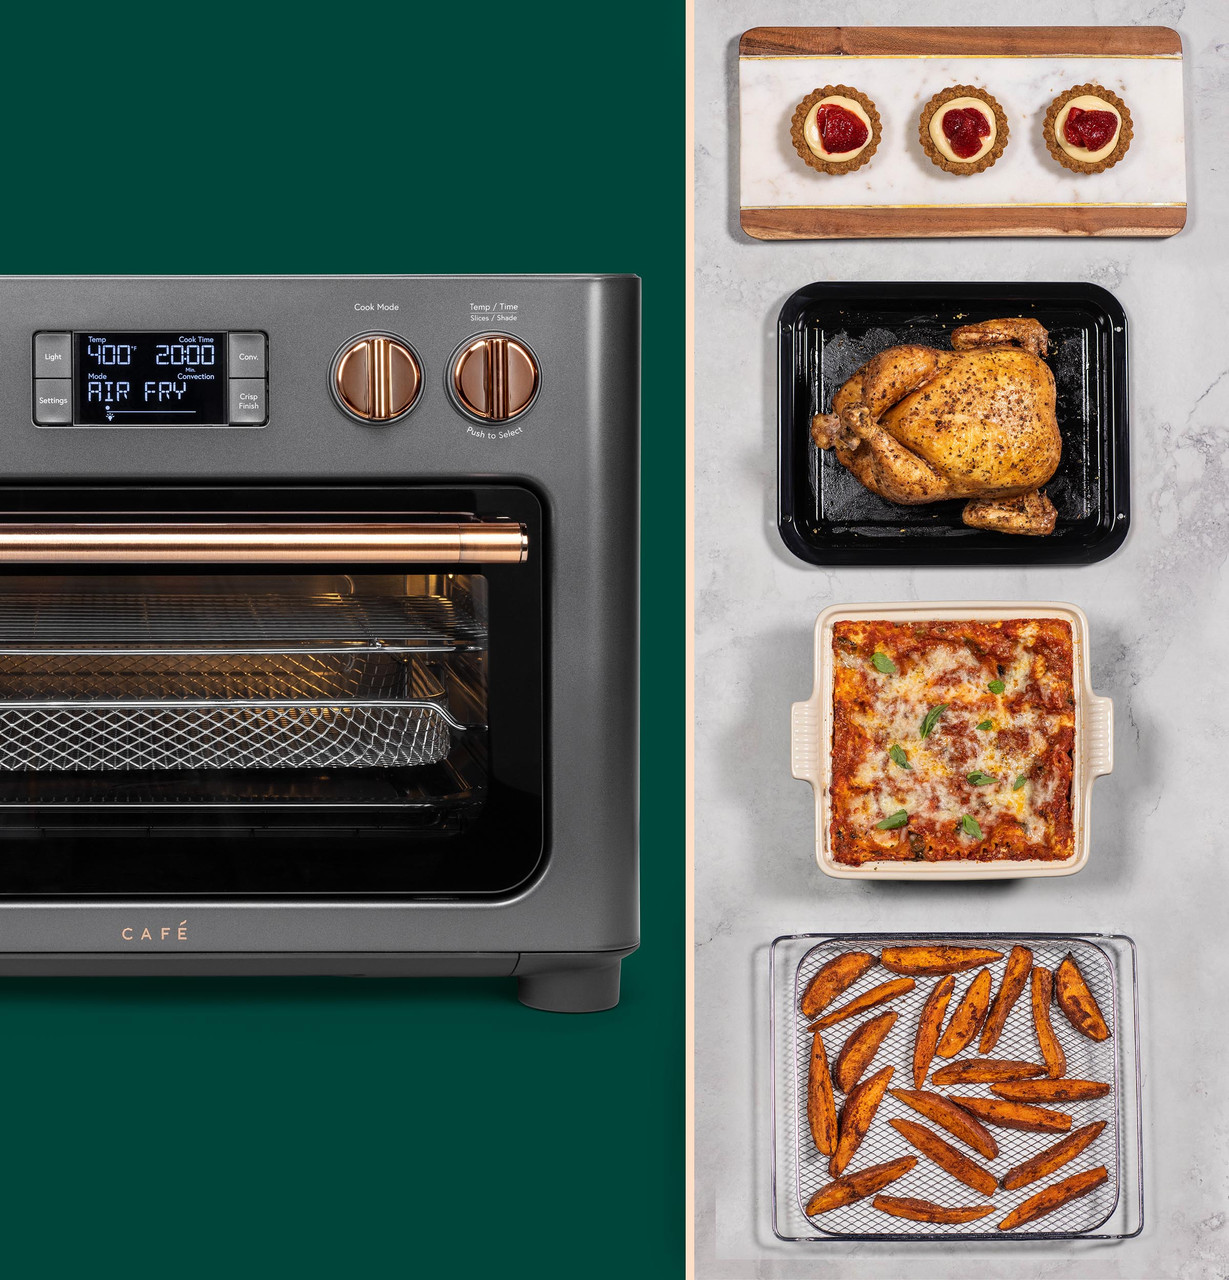 C9OAAAS3RD3 by Cafe - Café™ Couture™ Oven with Air Fry